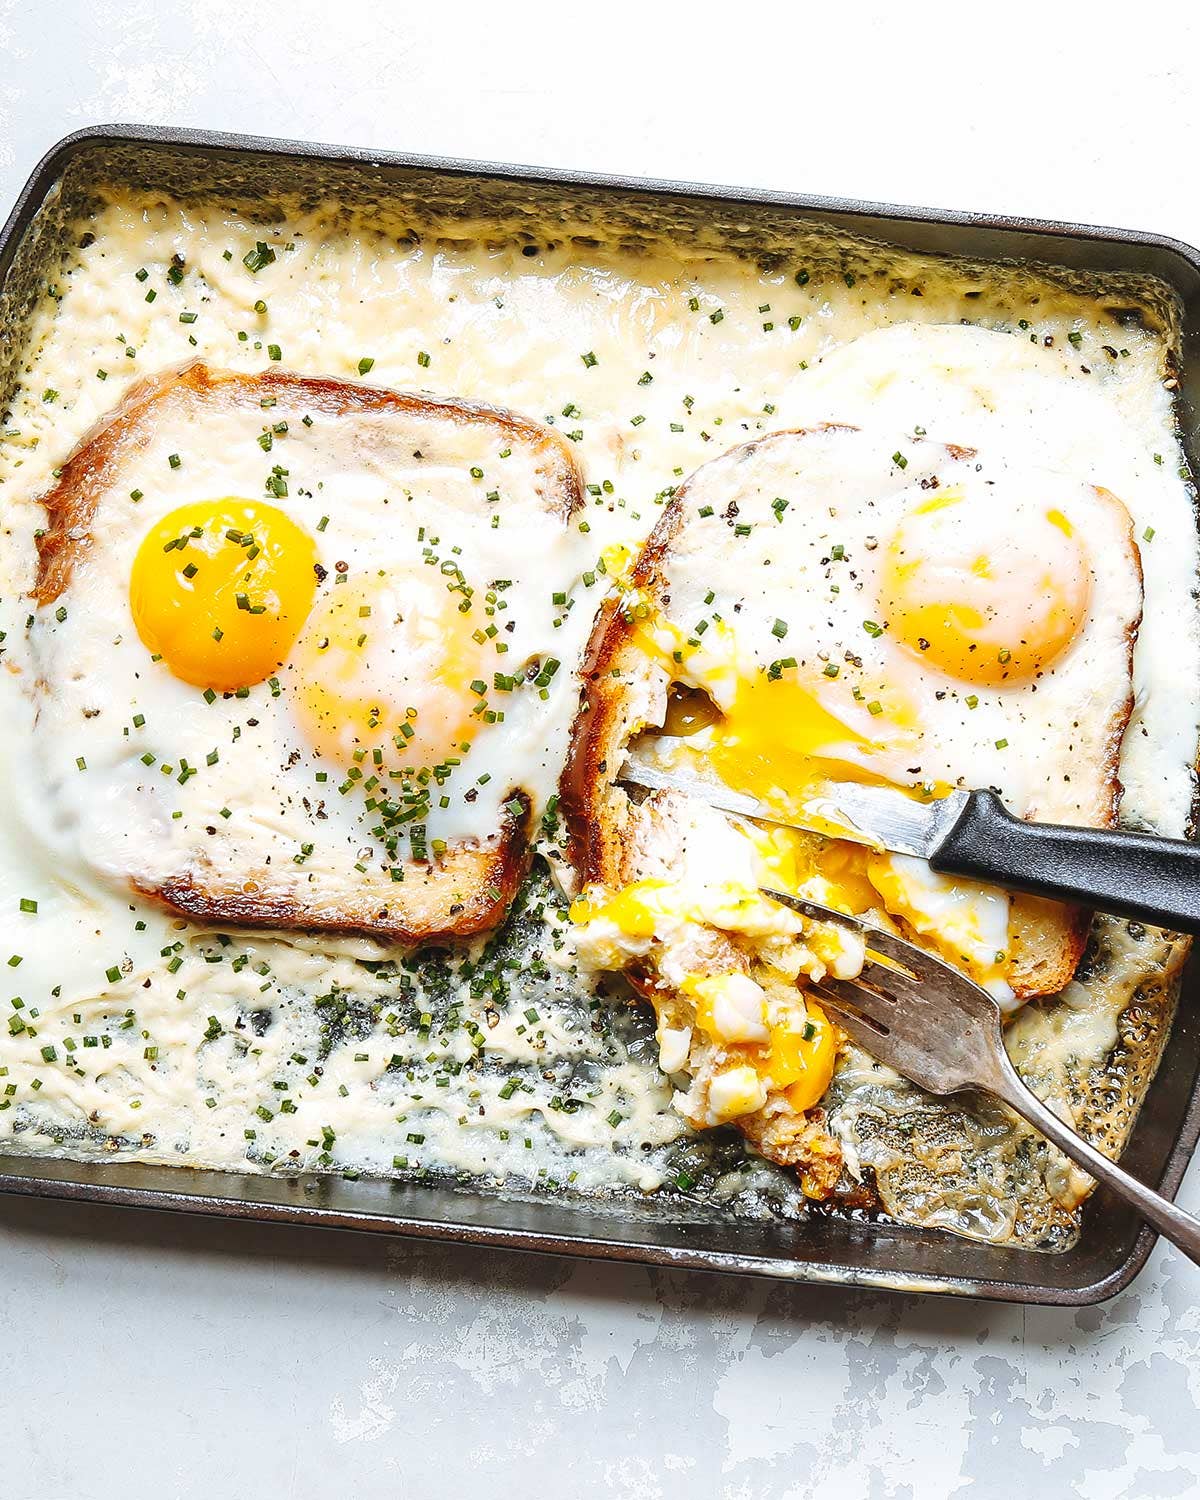 Baked Toast With Cream and Eggs May Be the Perfect Brunch Dish